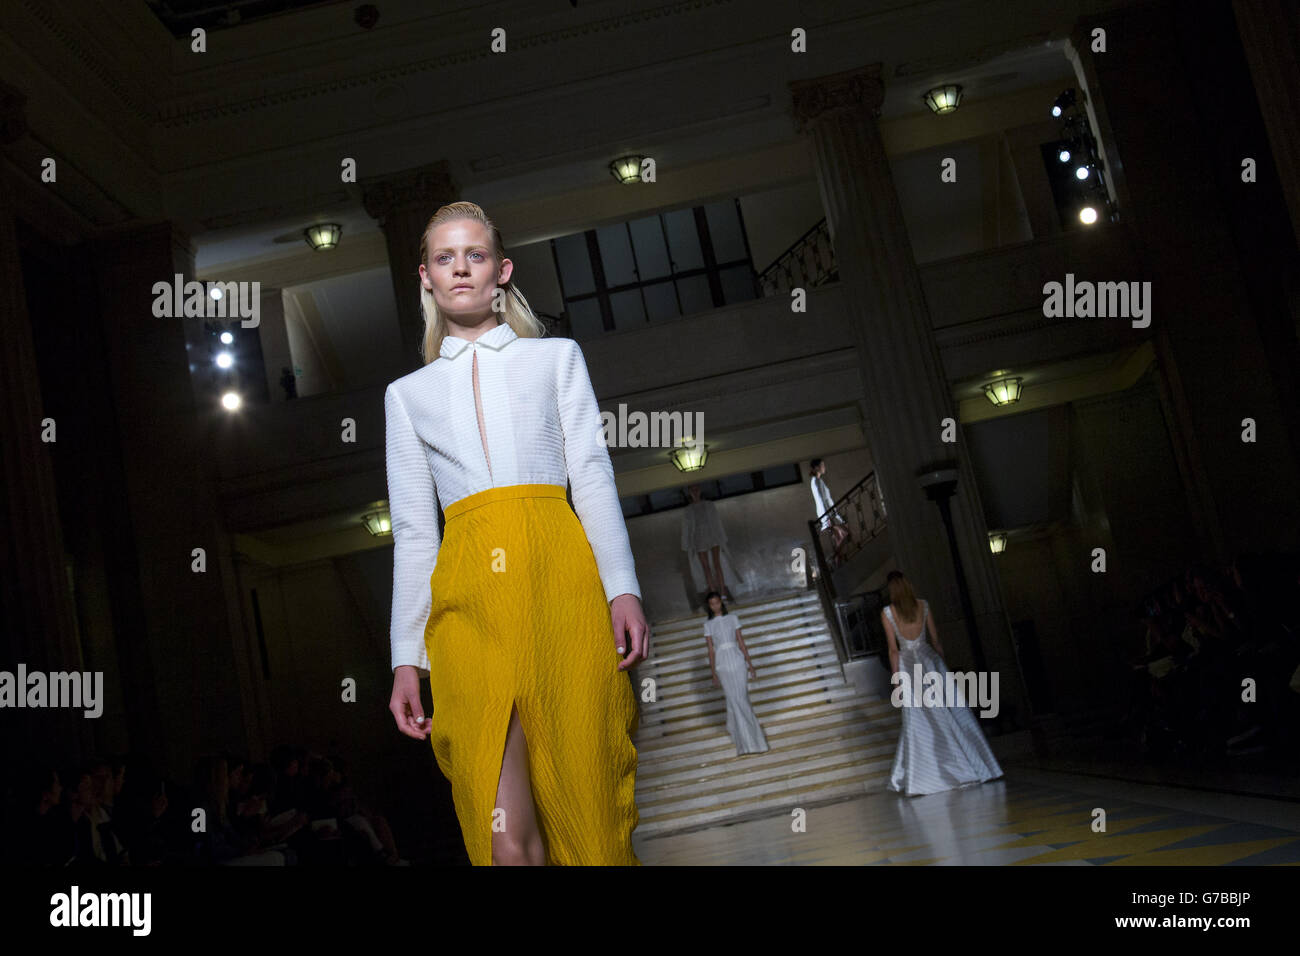 Models on the catwalk during the Emilia Wickstead catwalk show at The Banking Hall in London during London Fashion Week. Stock Photo